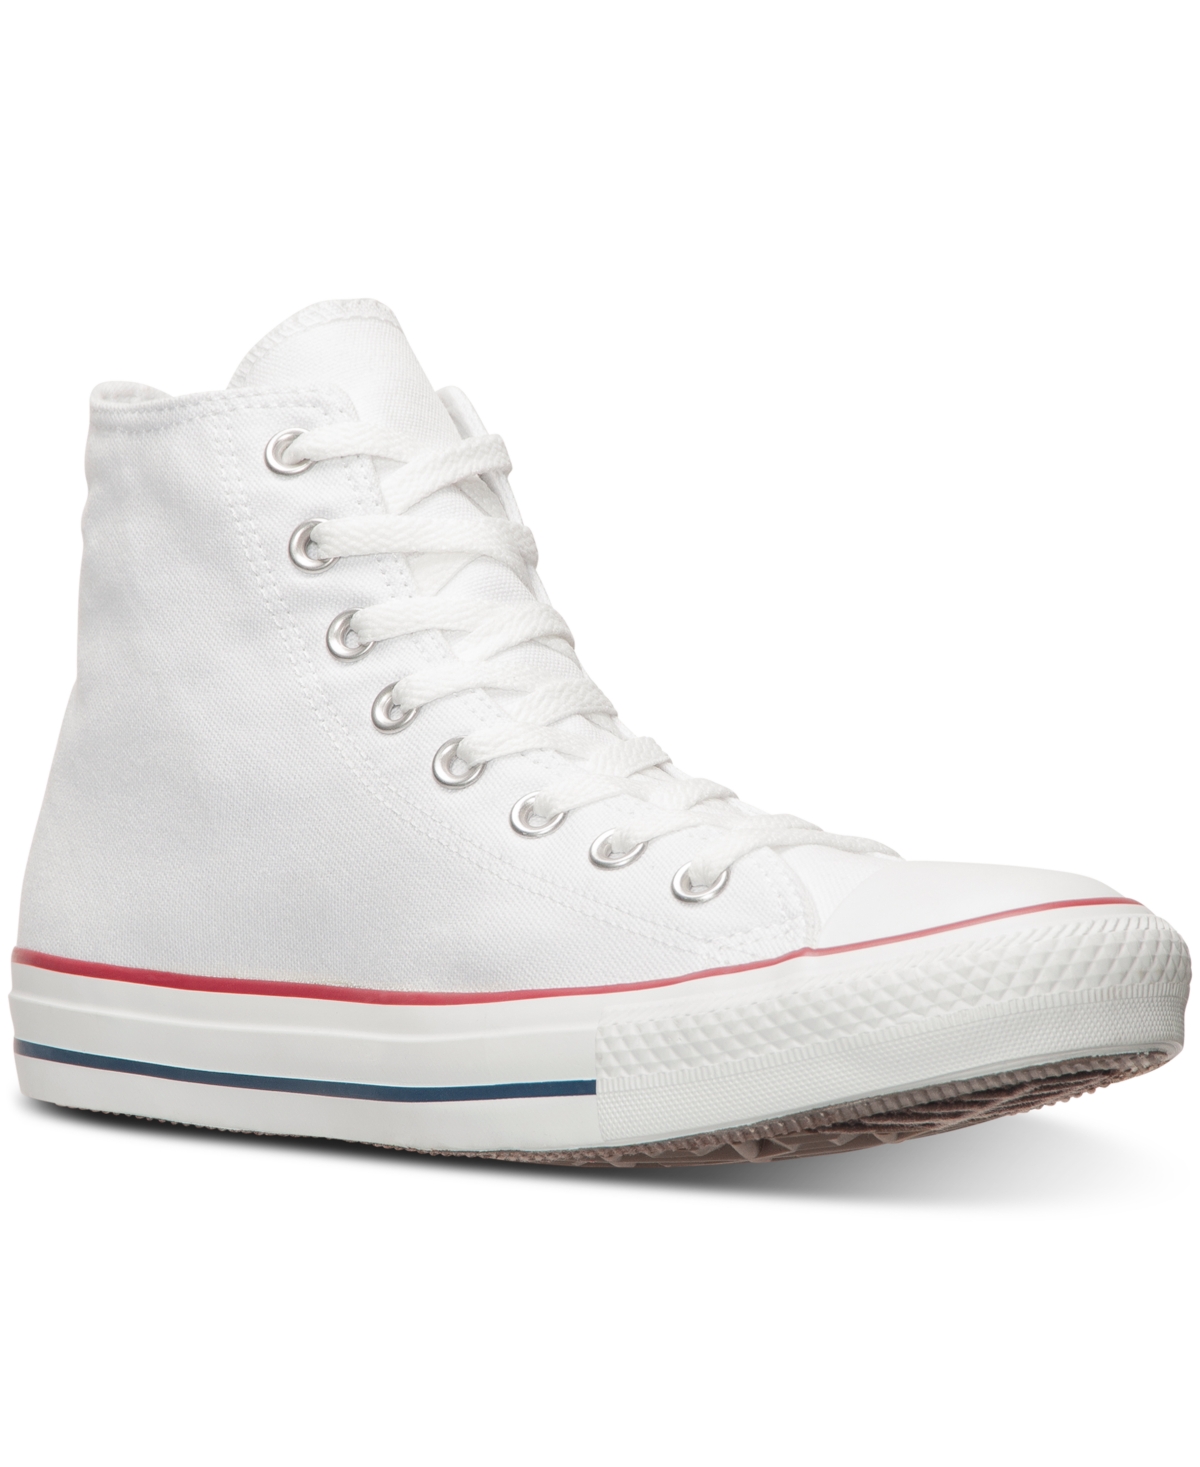 UPC 022859282710 product image for Converse Men's Chuck Taylor Hi Top Casual Sneakers from Finish Line | upcitemdb.com